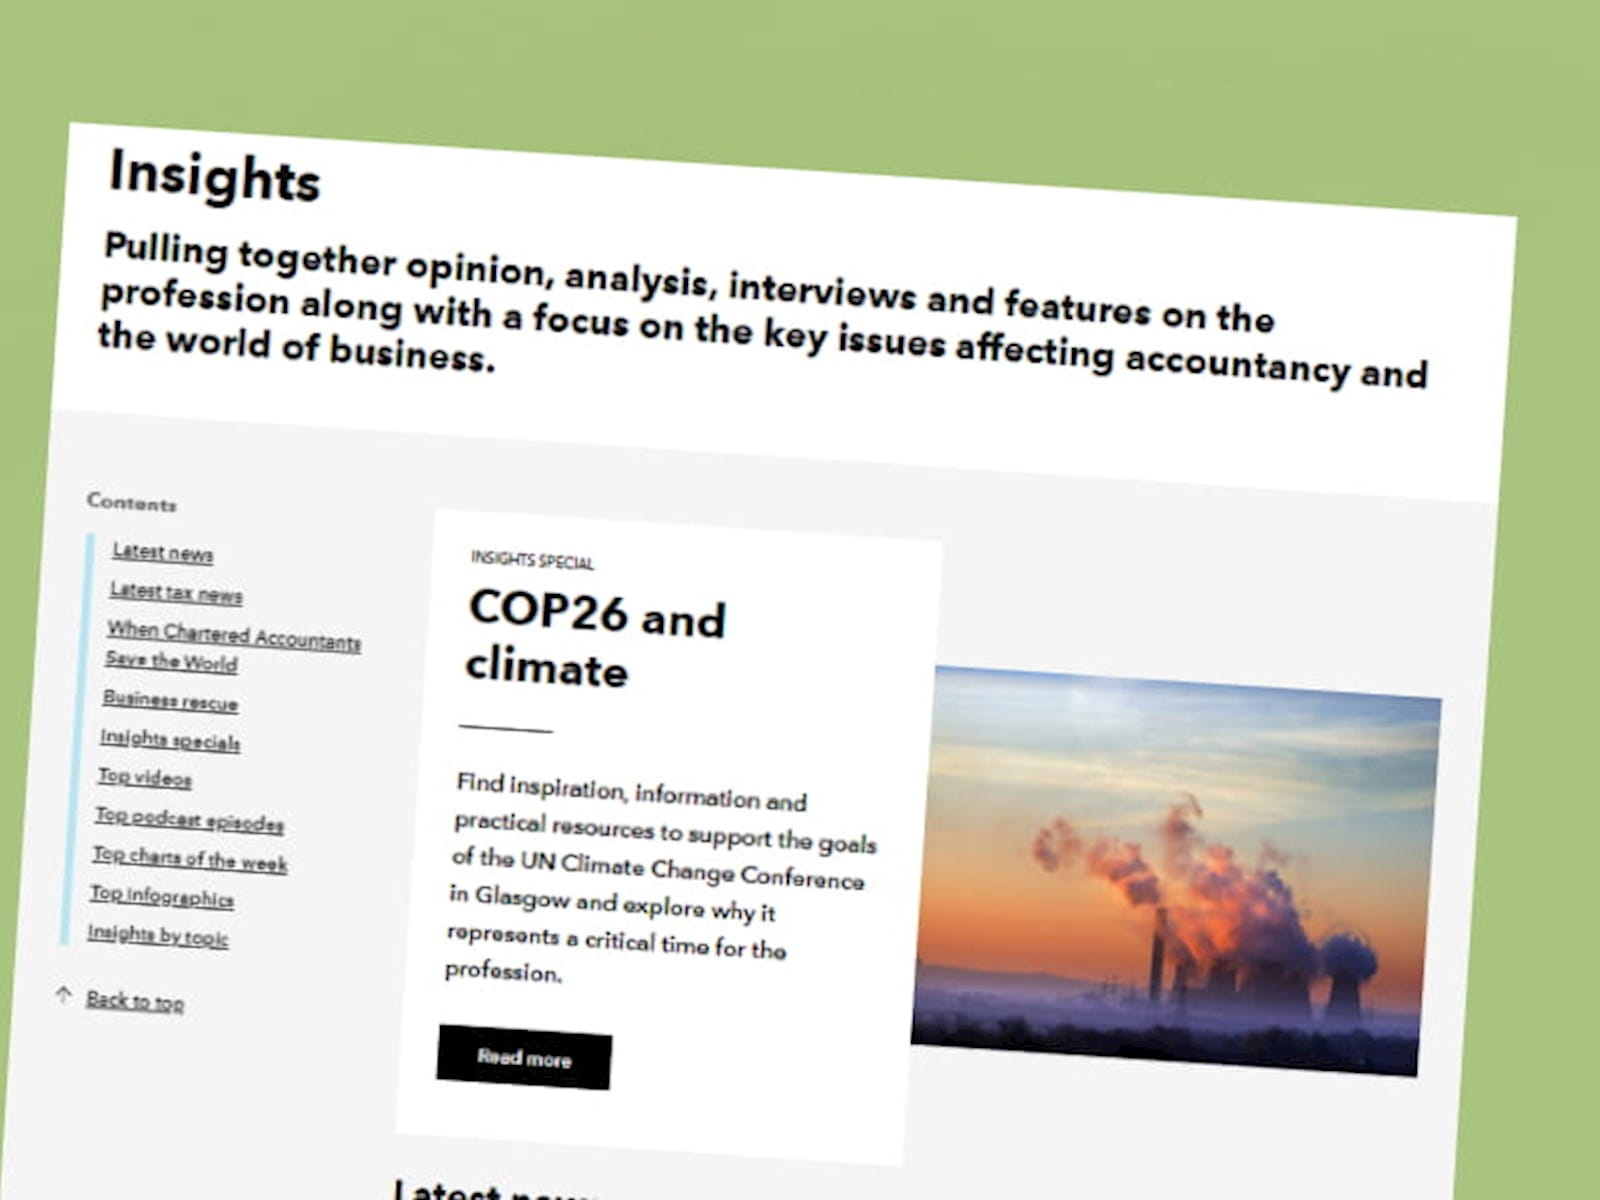 Insights page example image